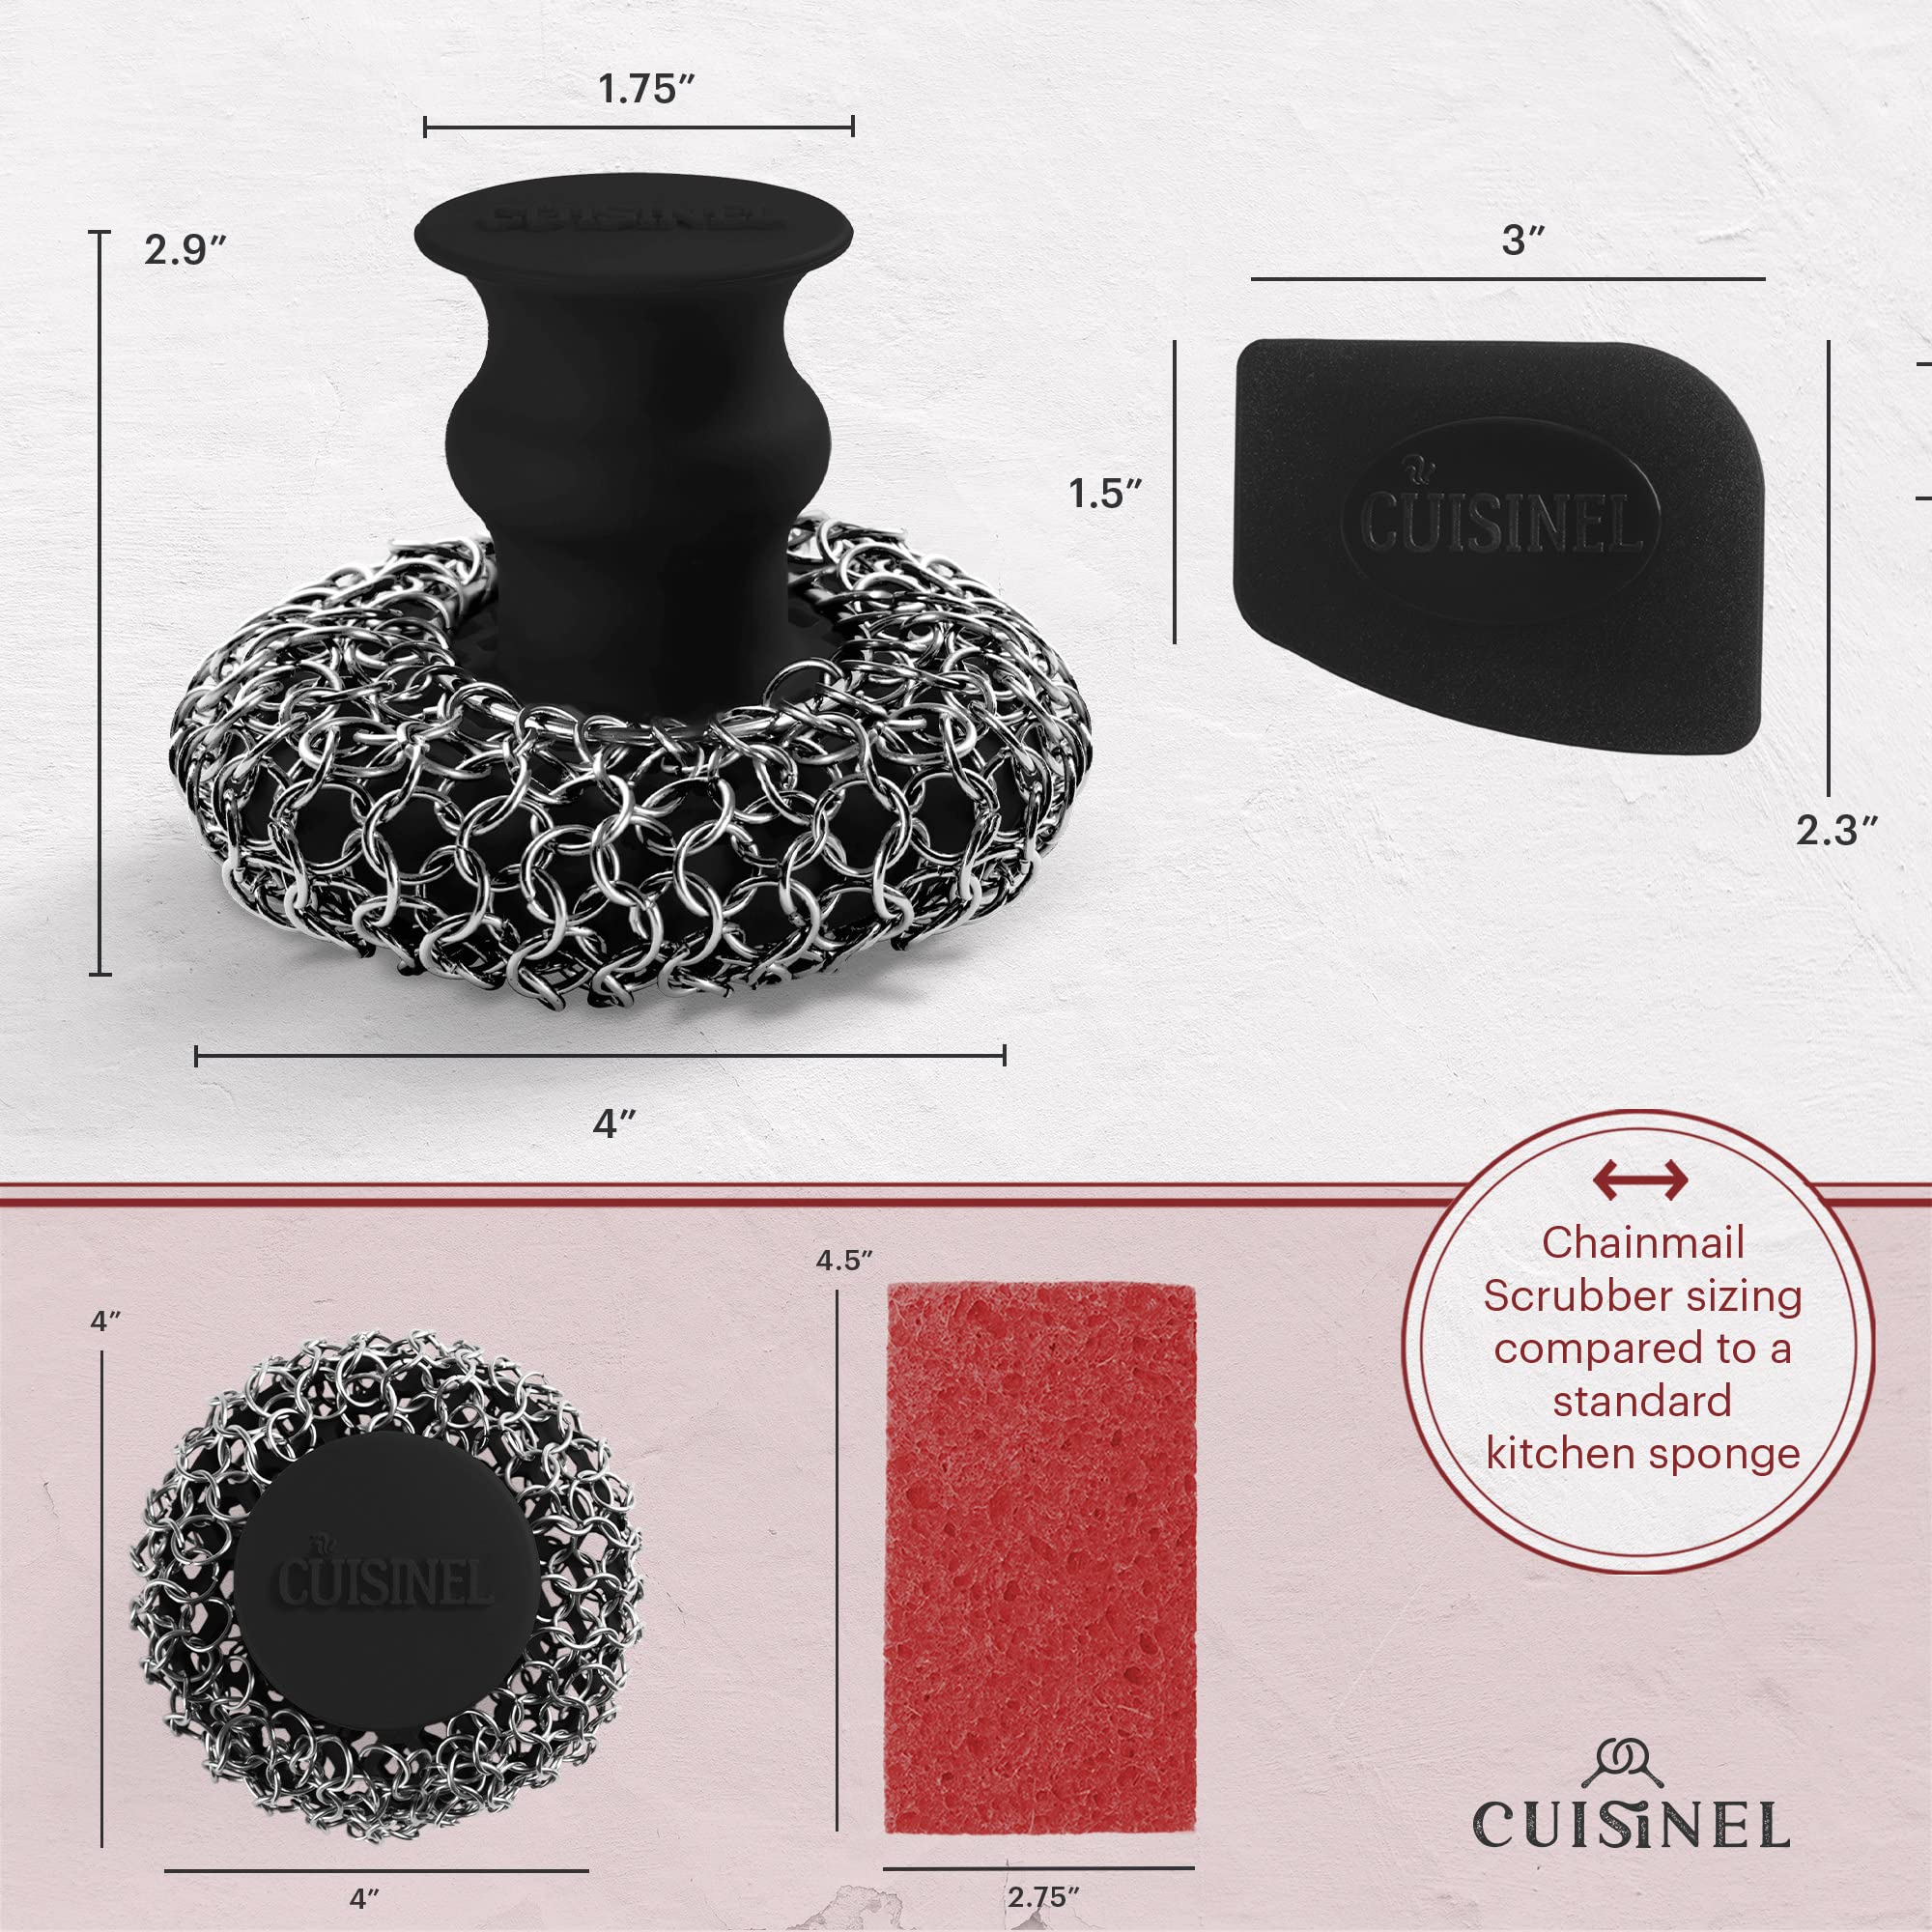 Cast Iron Chainmail Scrubber - Chain Mail Cleaner Brush - Dishes, Pots, Pan Brush - Silicone, Stainless Steel Scrub  - Acceptable